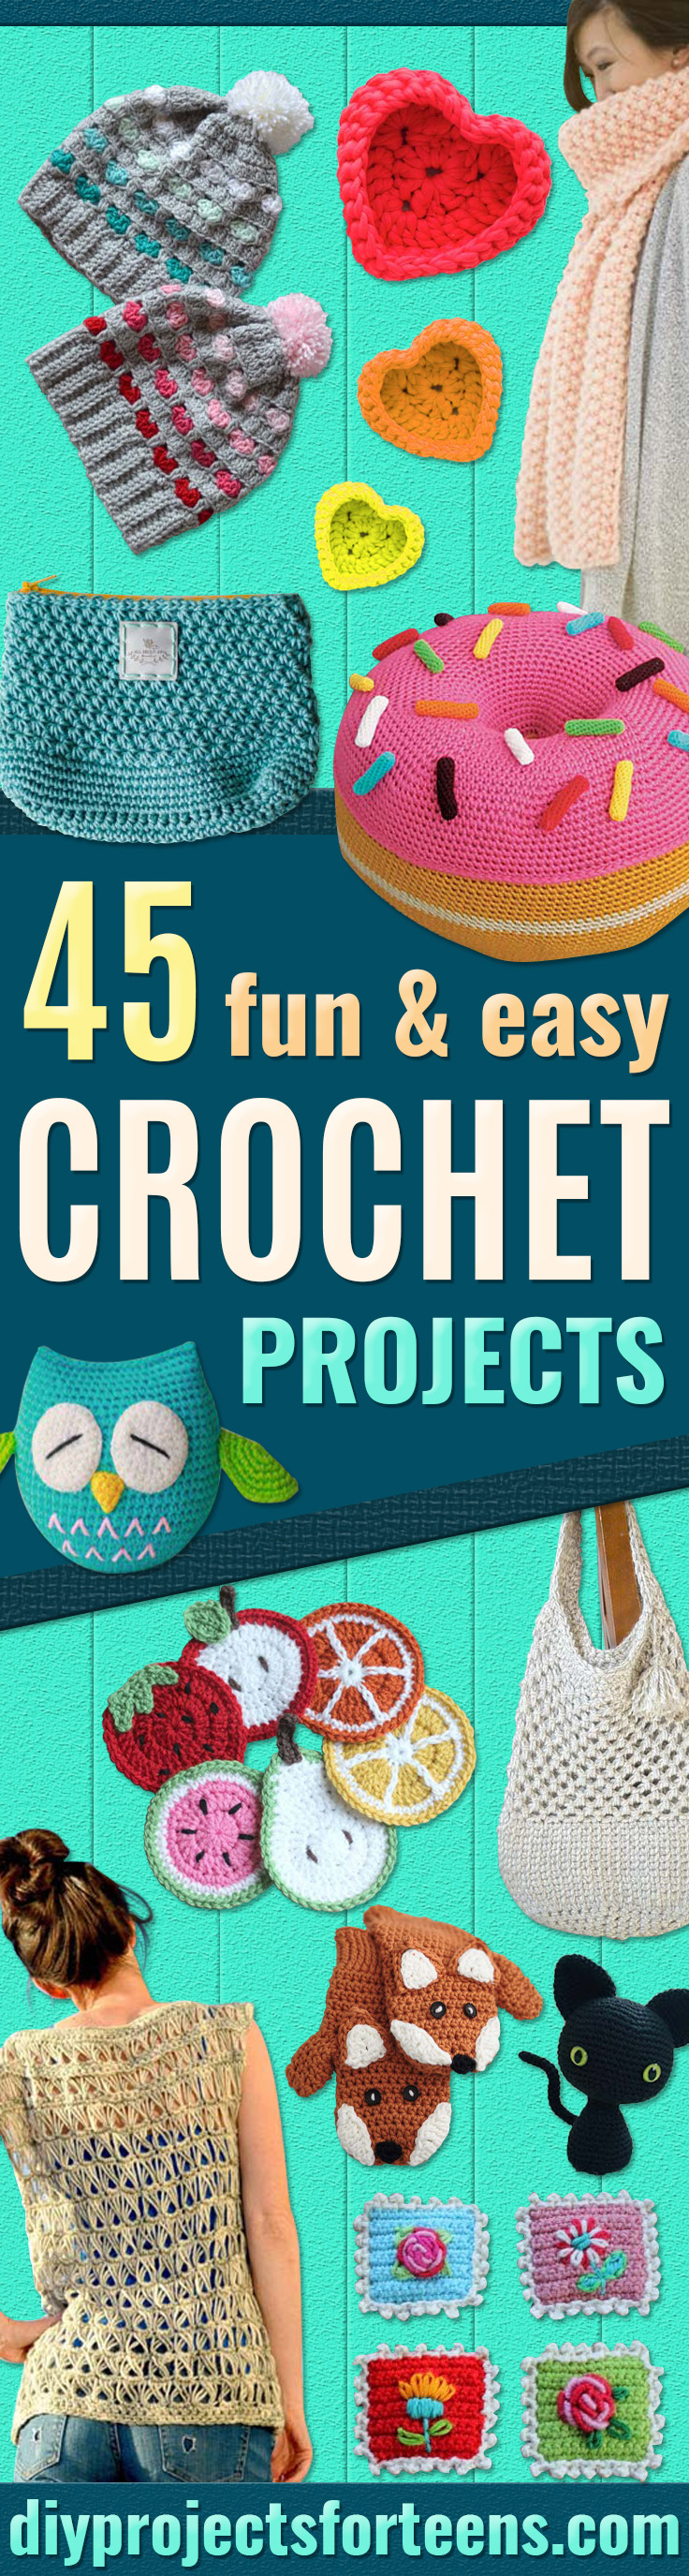 Crochet For Beginners Patterns Free 45 Fun And Easy Crochet Projects